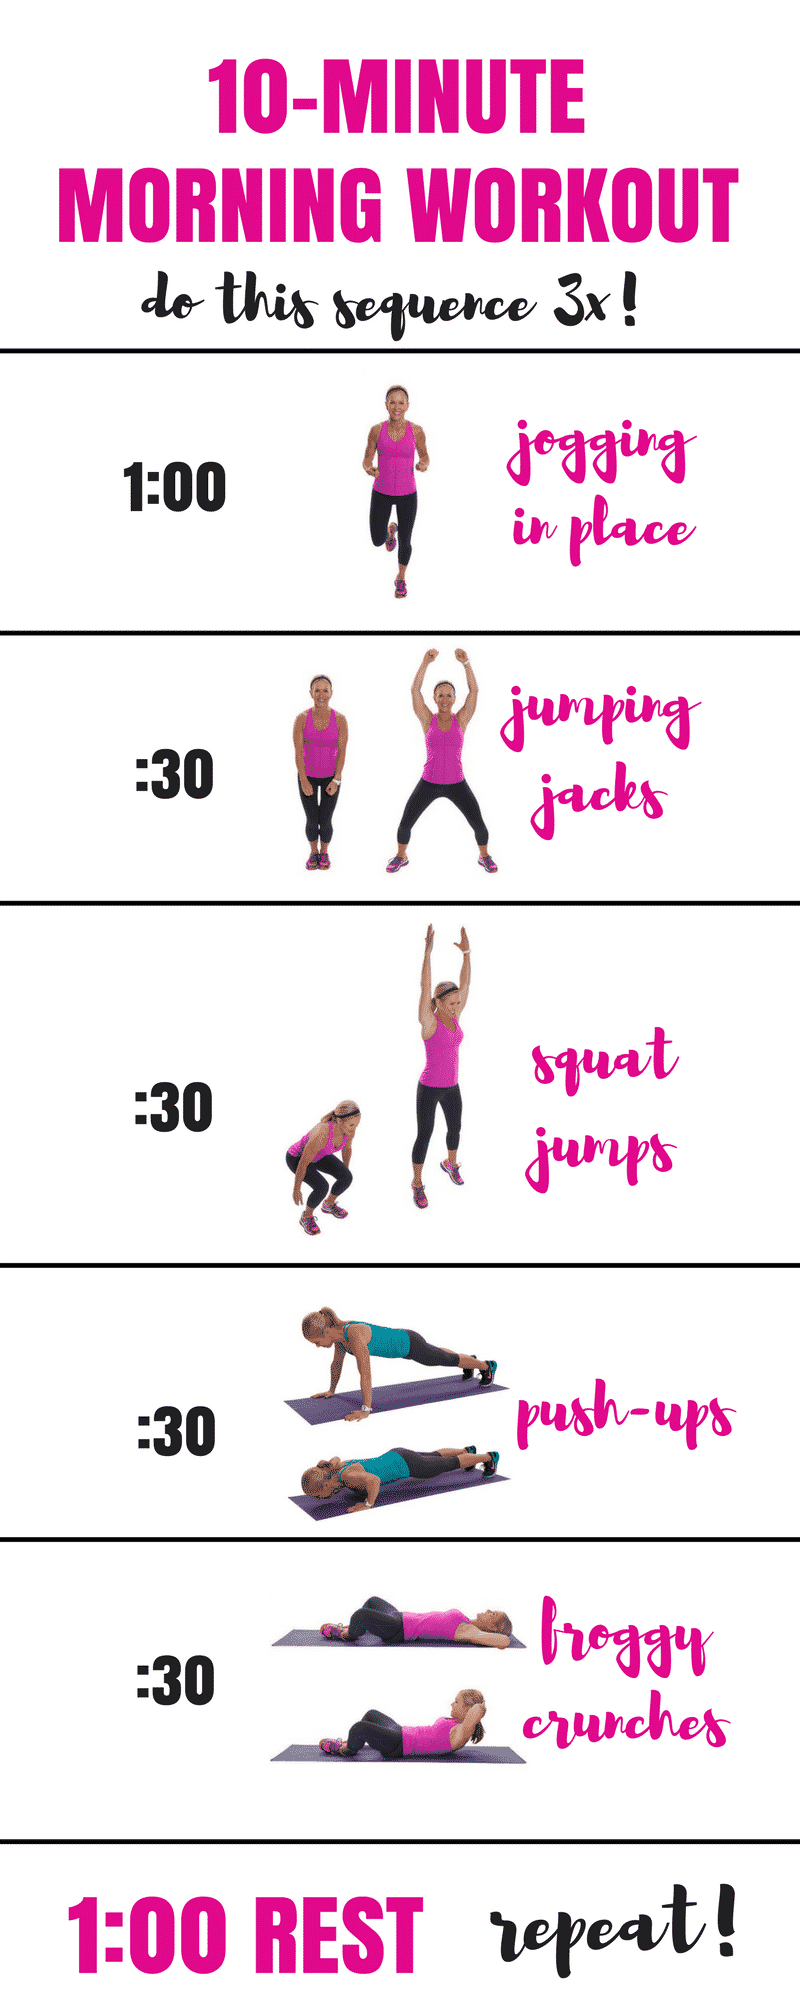 Use this 10-minute workout to jumpstart your morning.